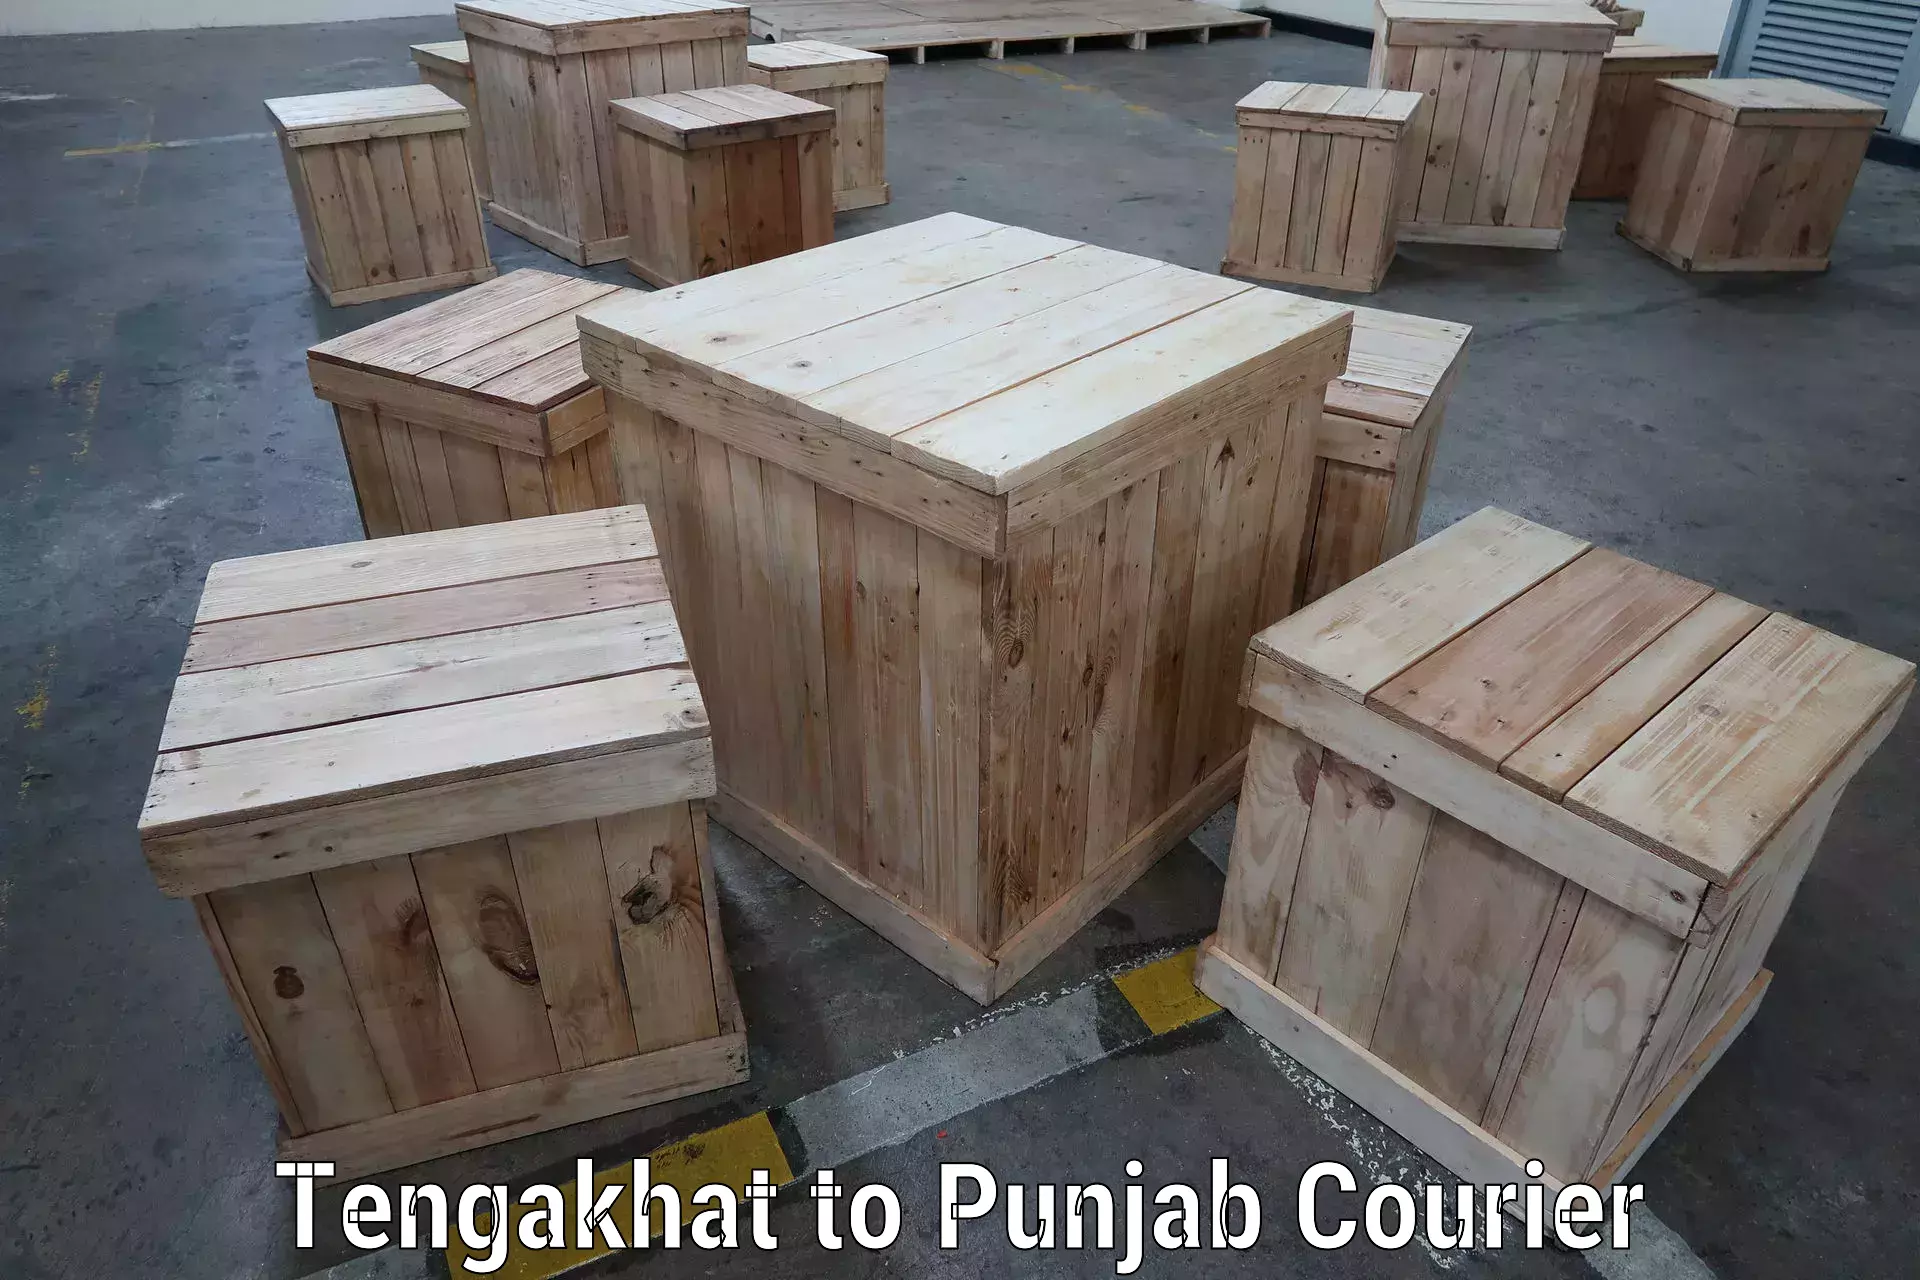 Overnight delivery services Tengakhat to Punjab